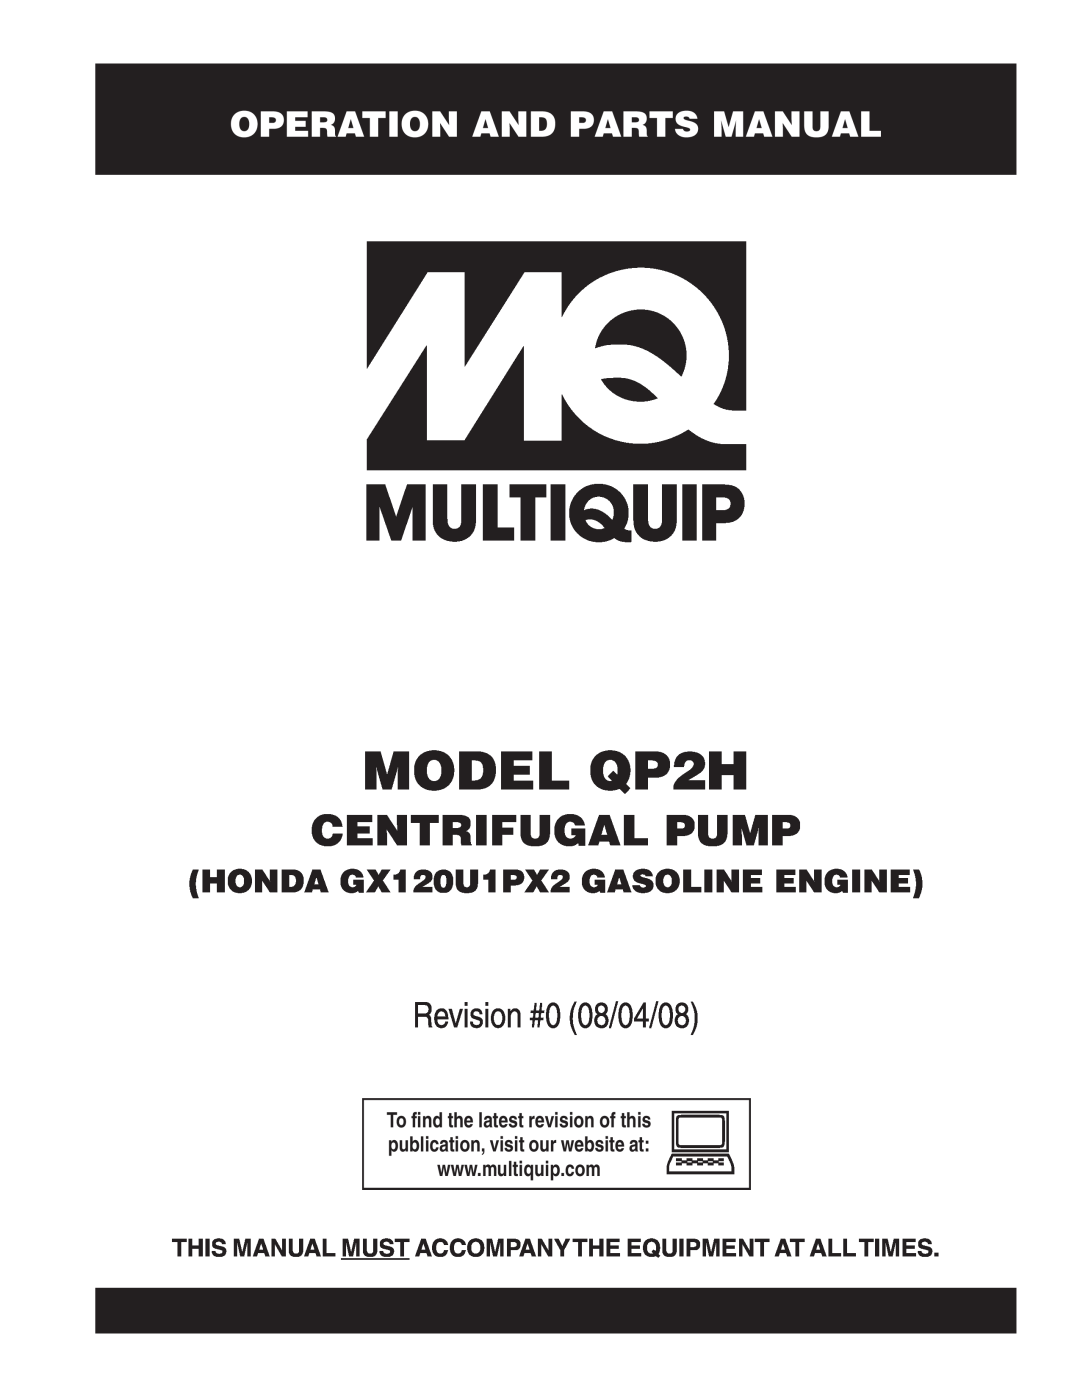 Multiquip manual Operation And Parts Manual, MODEL QP2H, Centrifugal Pump, Revision #0 08/04/08 